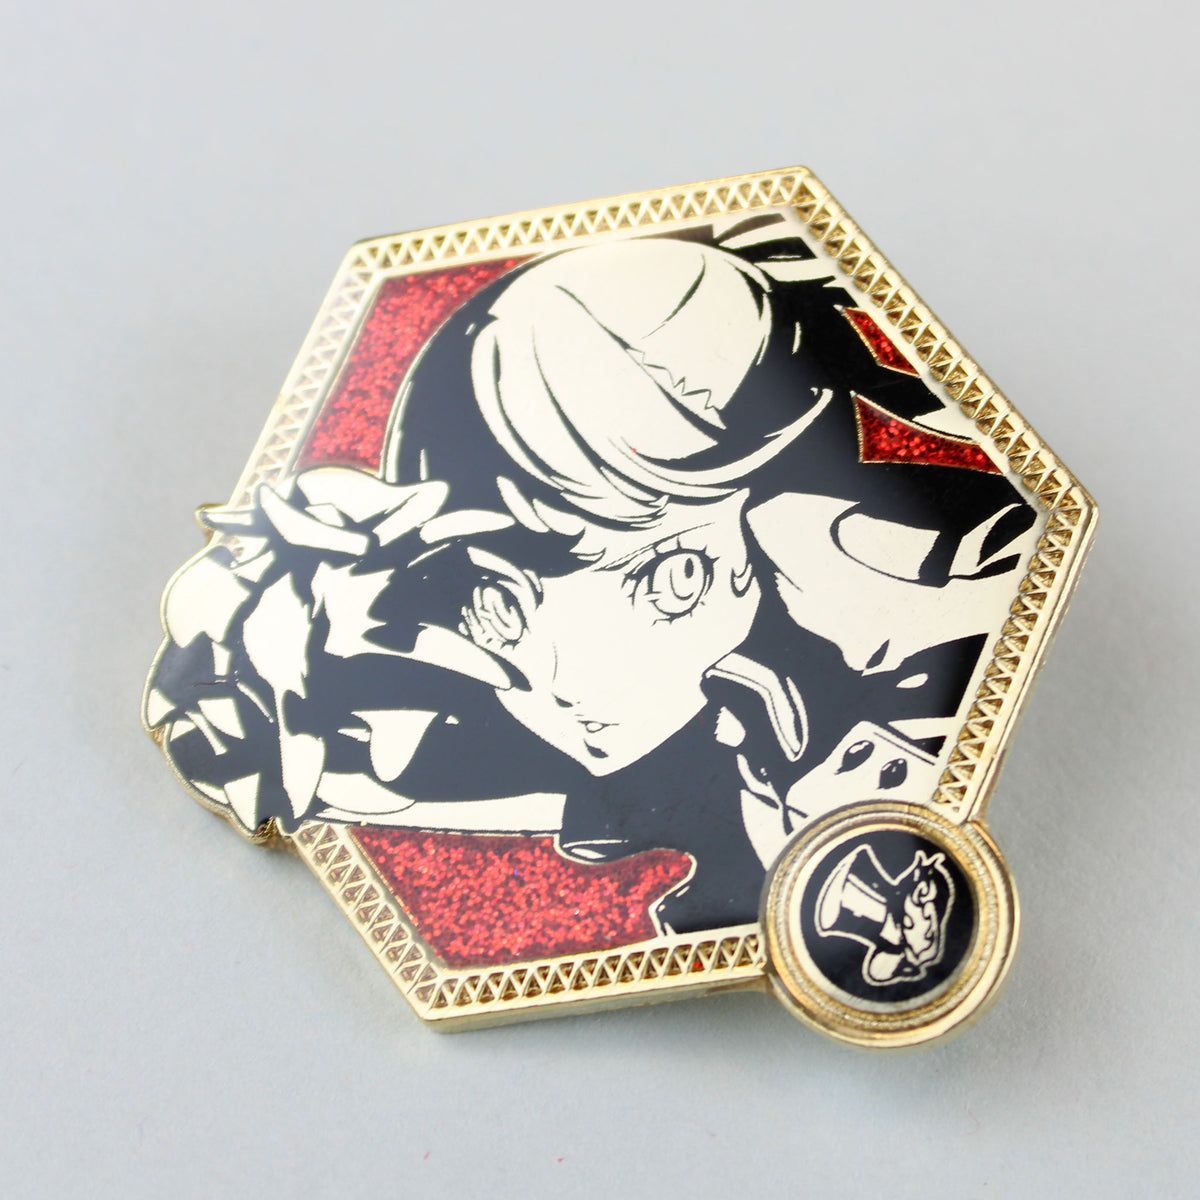 Persona 5 Royal Characters Sticker Set – Shadow Anime